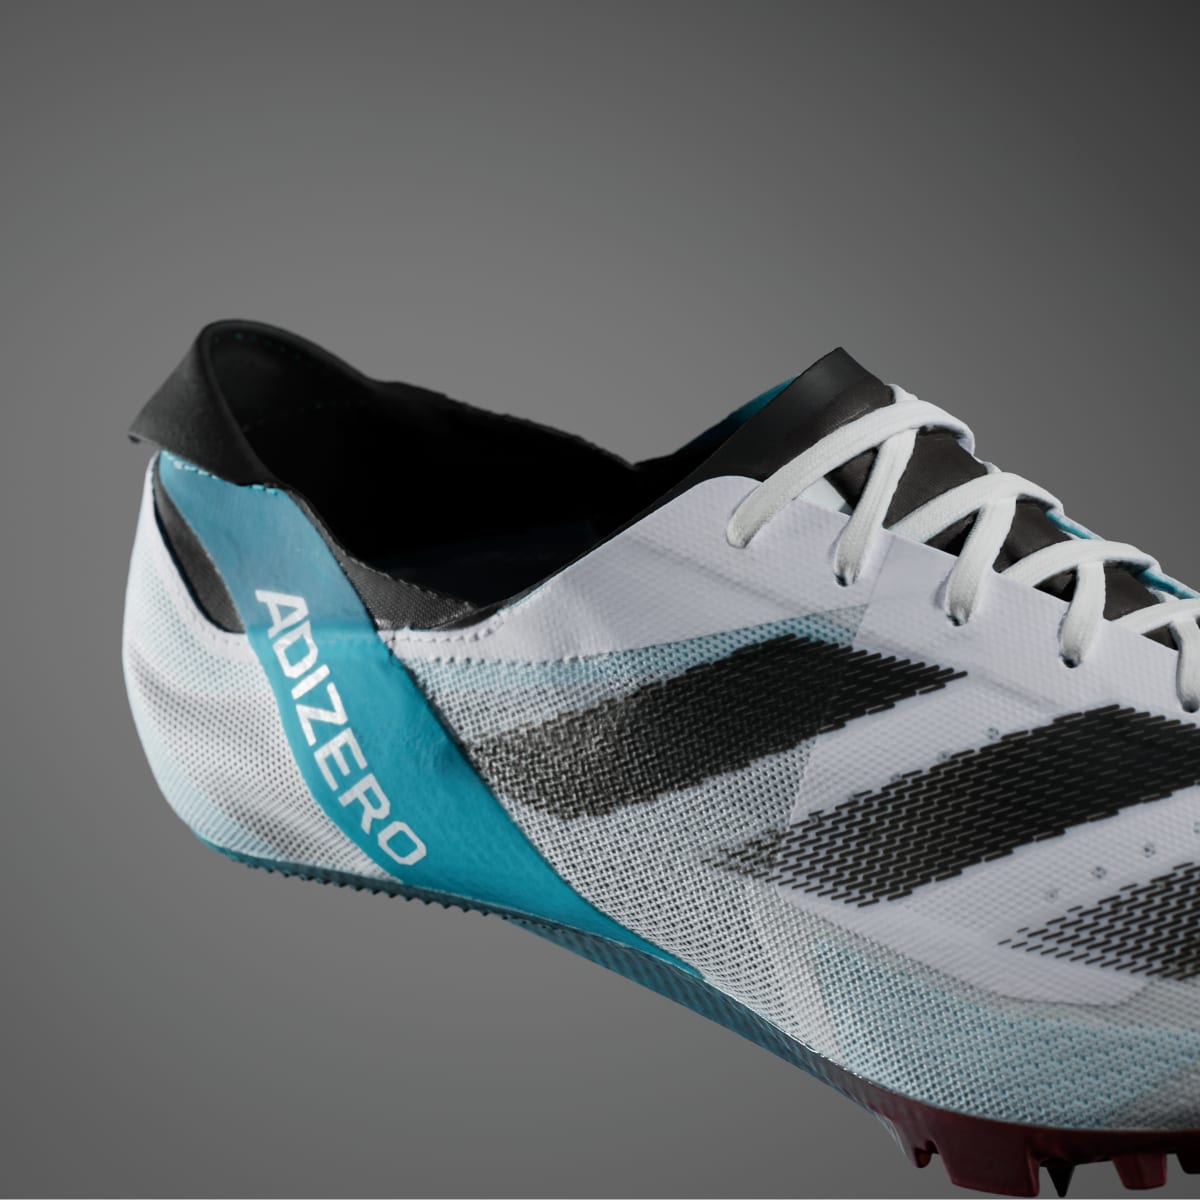 Adidas Adizero Finesse Track and Field Shoes. 10